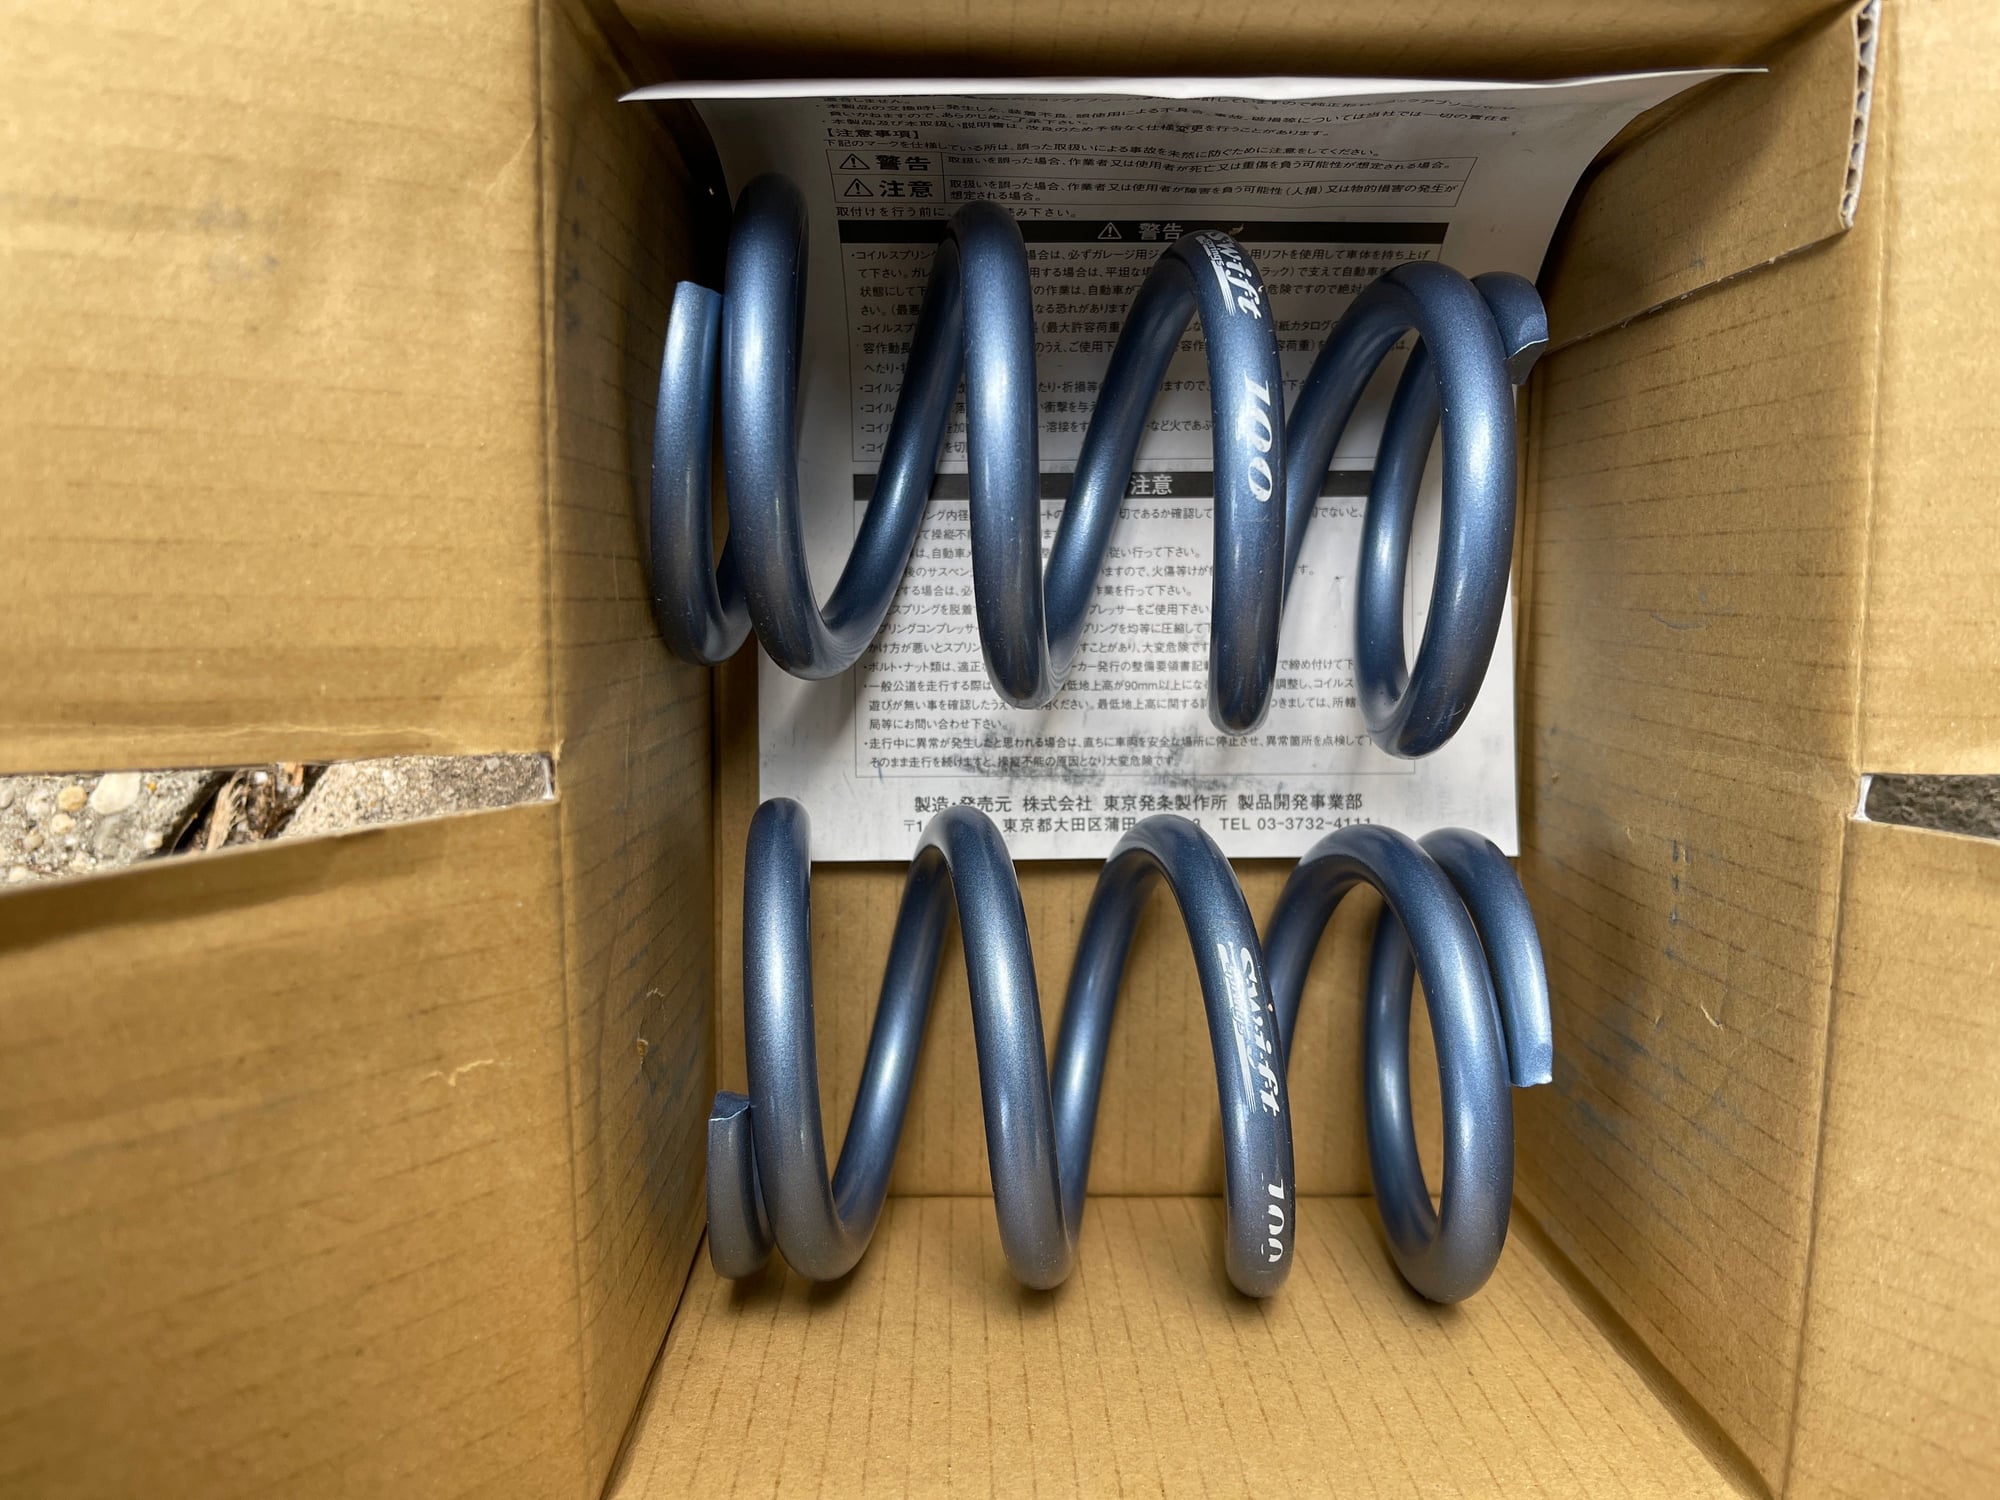 Steering/Suspension - Bnib Swift Springs 991 - New - 0  All Models - Queens, NY 11427, United States